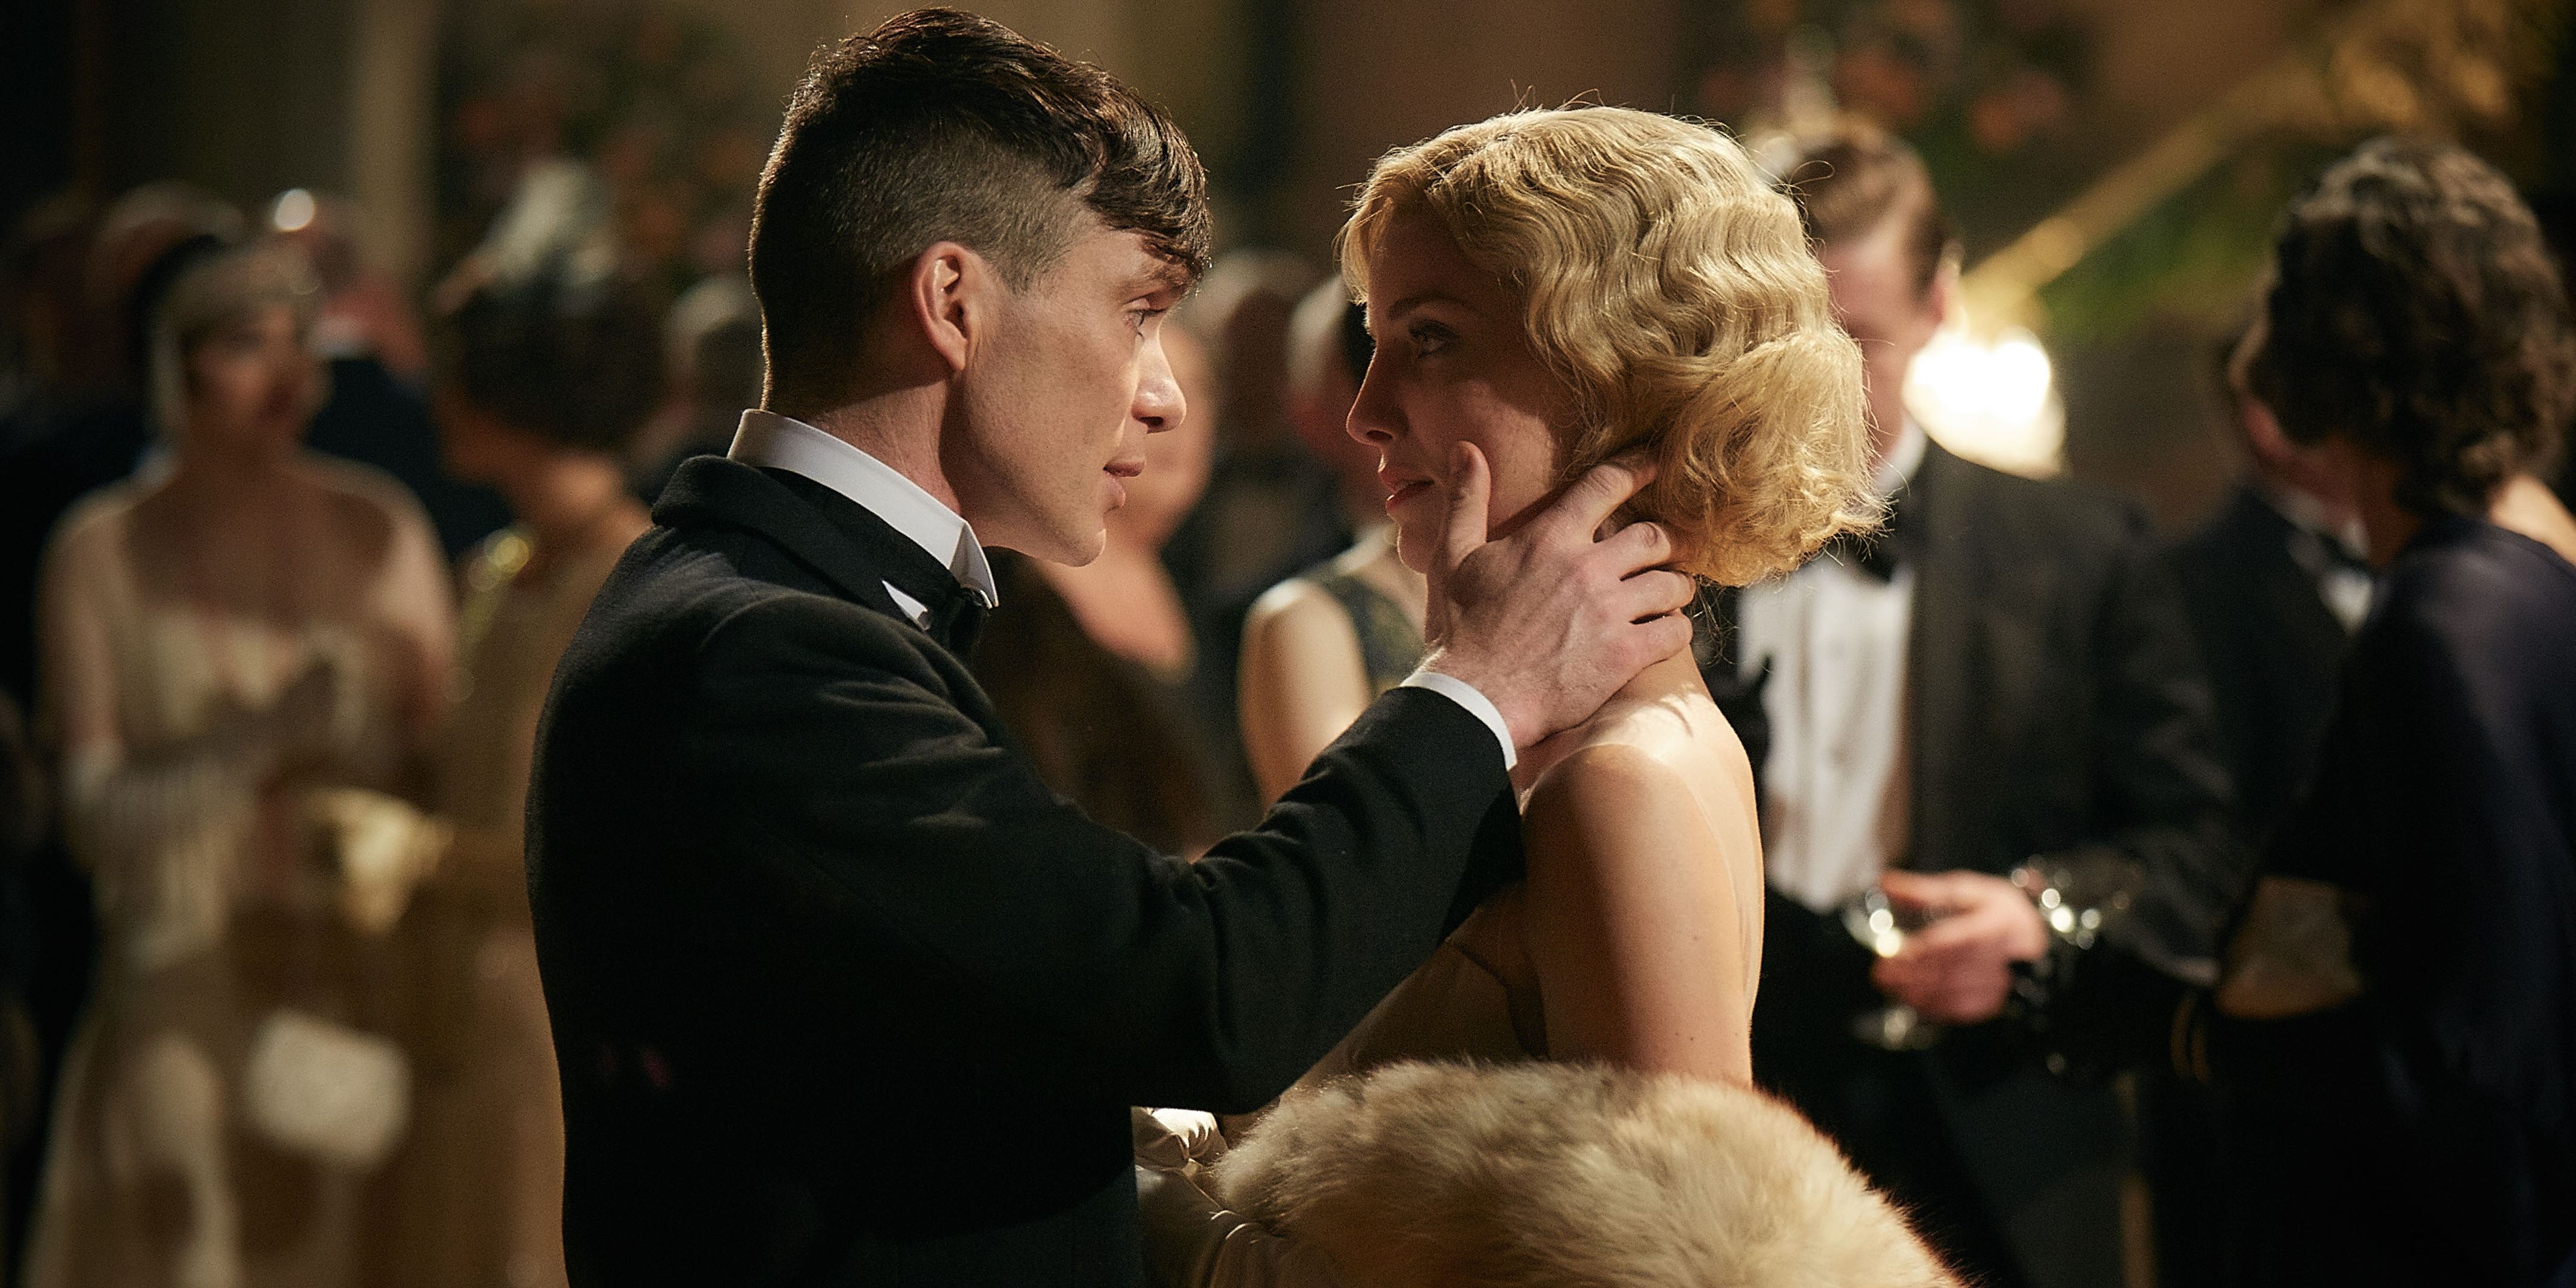 Tommy tries to remove the cursed necklace from Grace's neck in Peaky Blinders 